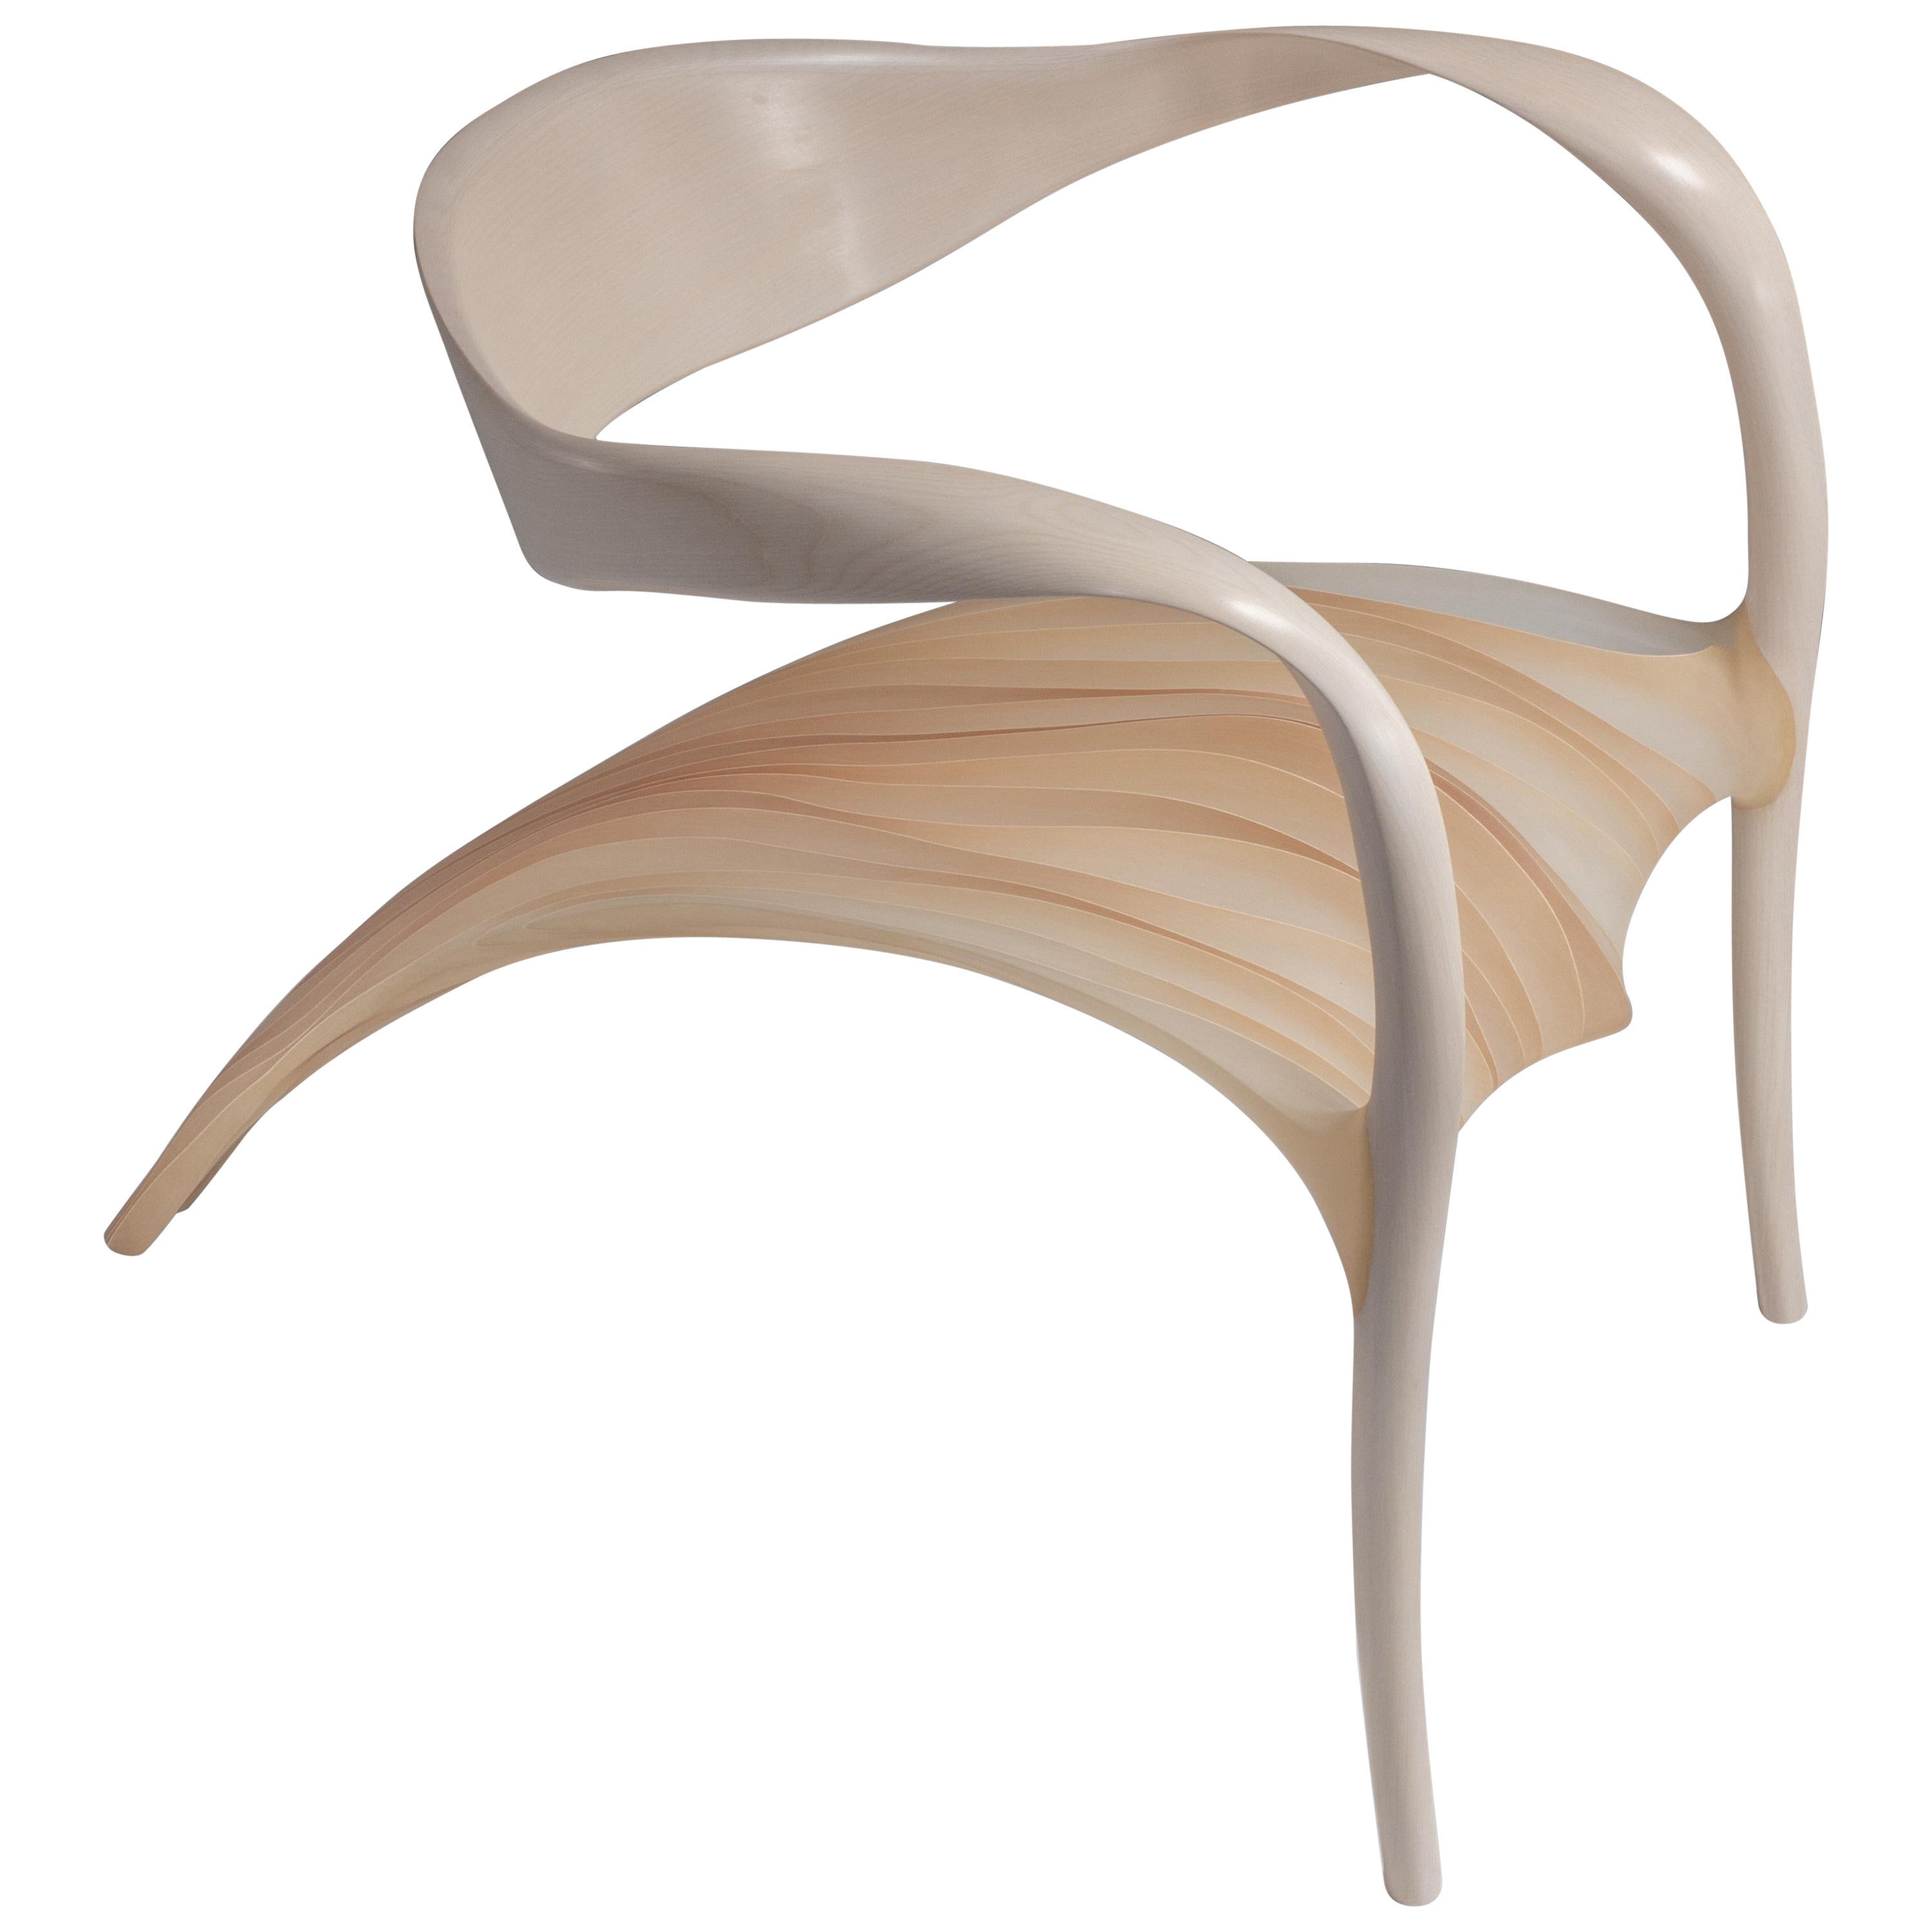 Marc Fish Ethereal Lounge Chair Sycamore and Resin Organic Sculptural Design For Sale